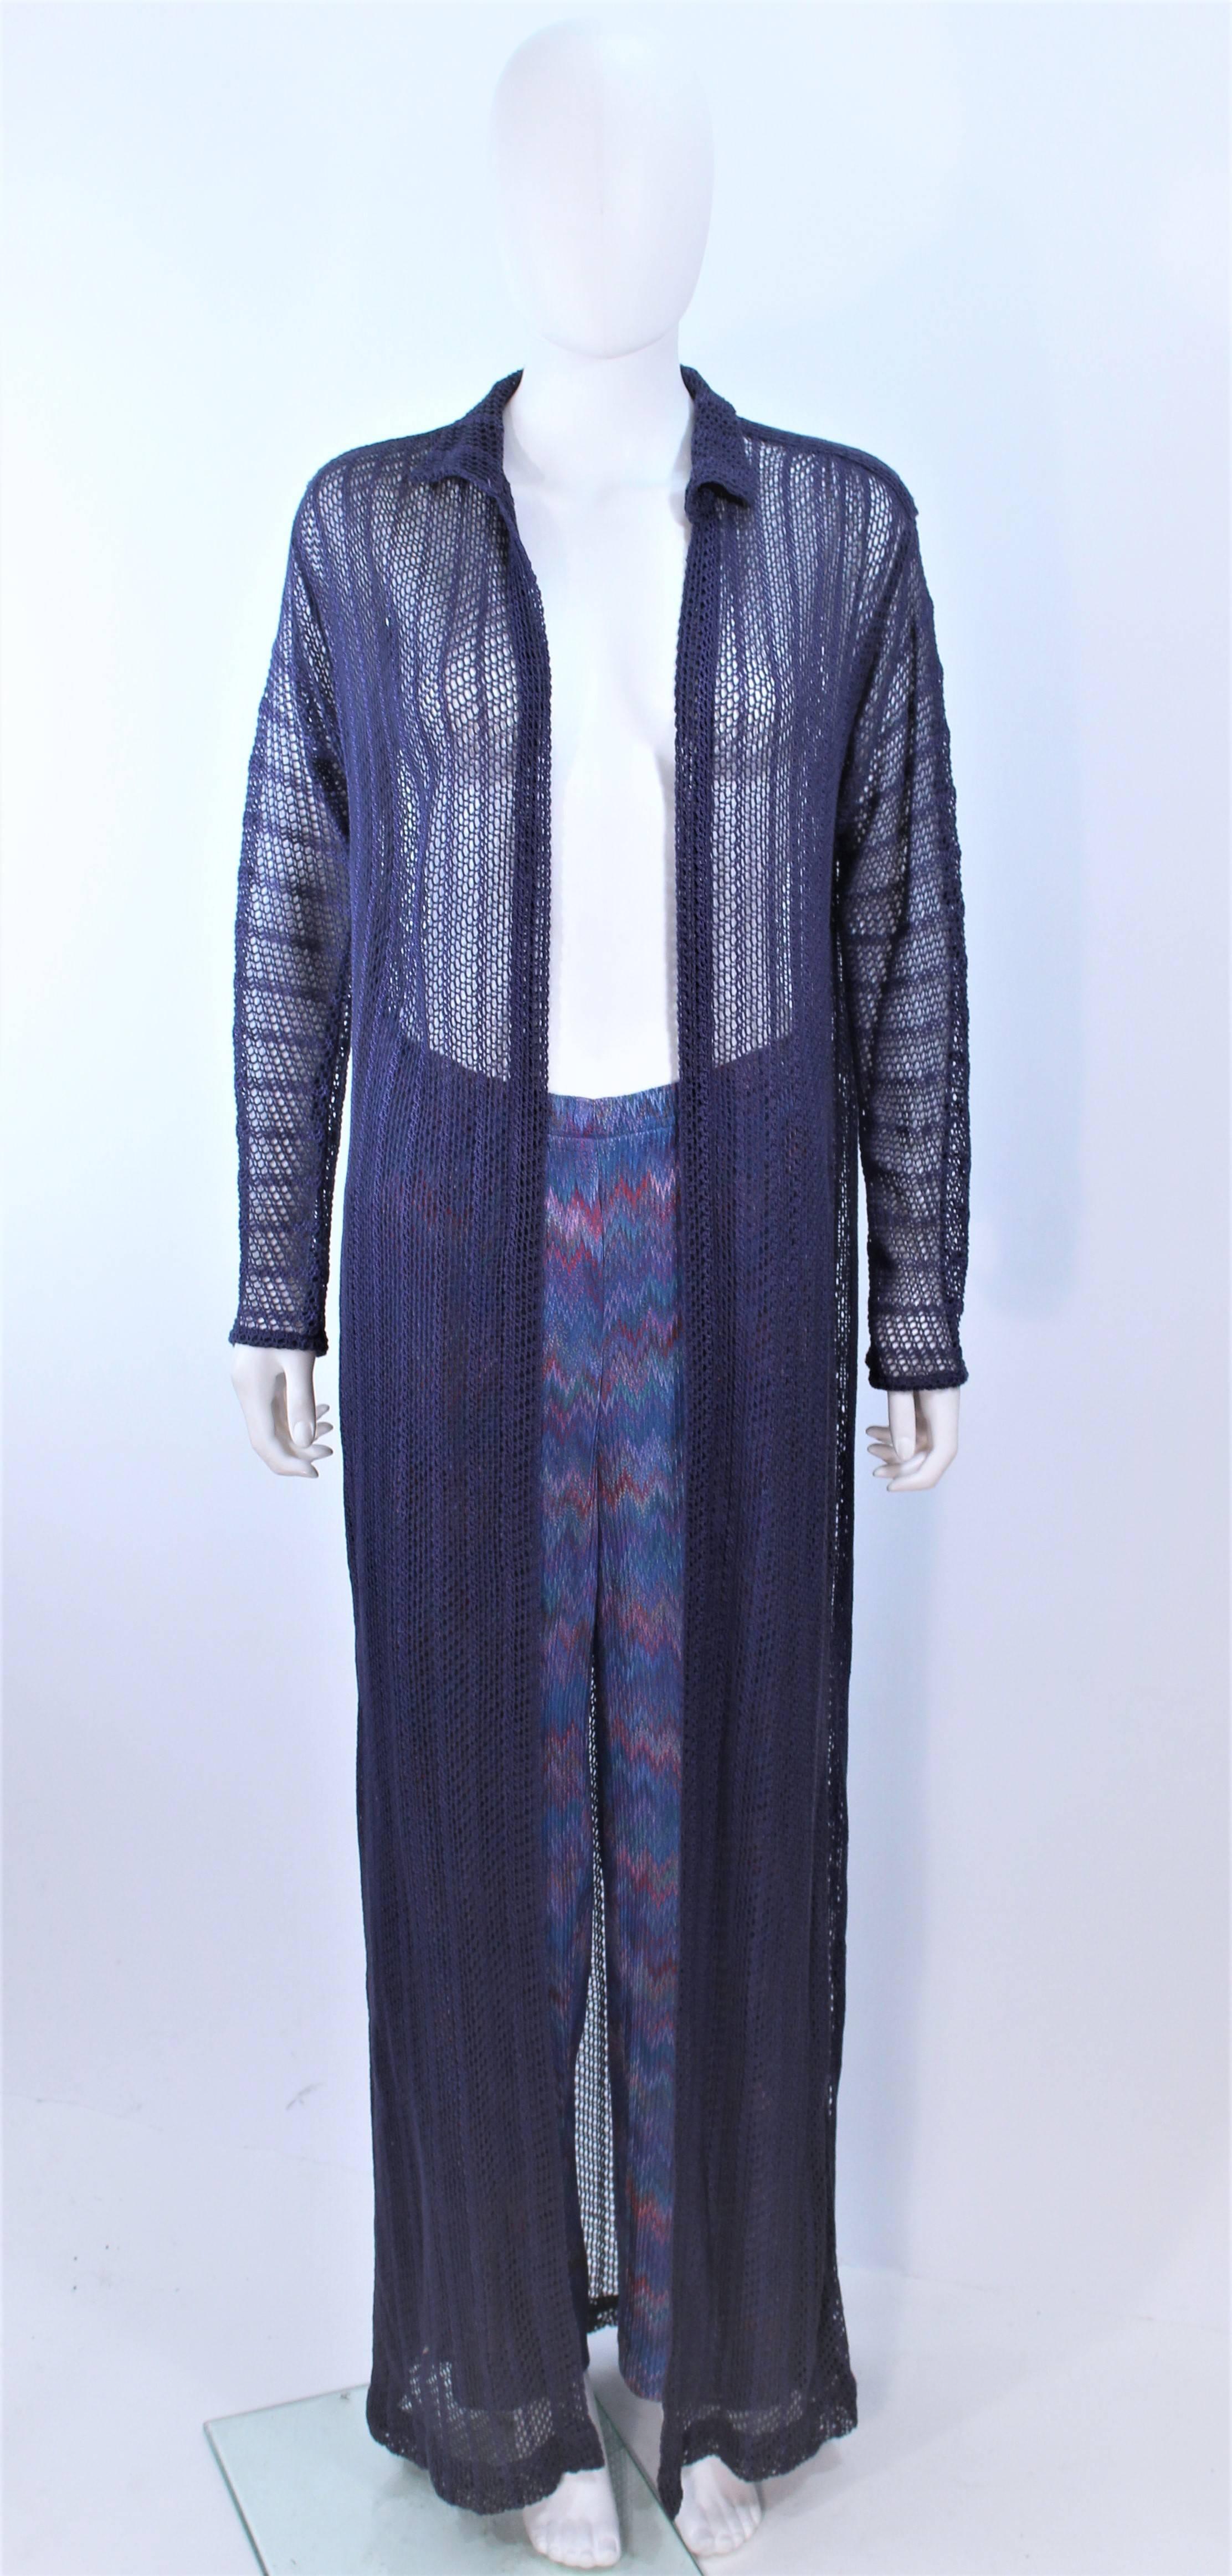 This Missoni set is composed of a periwinkle hue full length knit duster and zig zag print pants. Sweater has an open style and the pants have an elastic waist. In excellent vintage condition.

**Please cross-reference measurements for personal